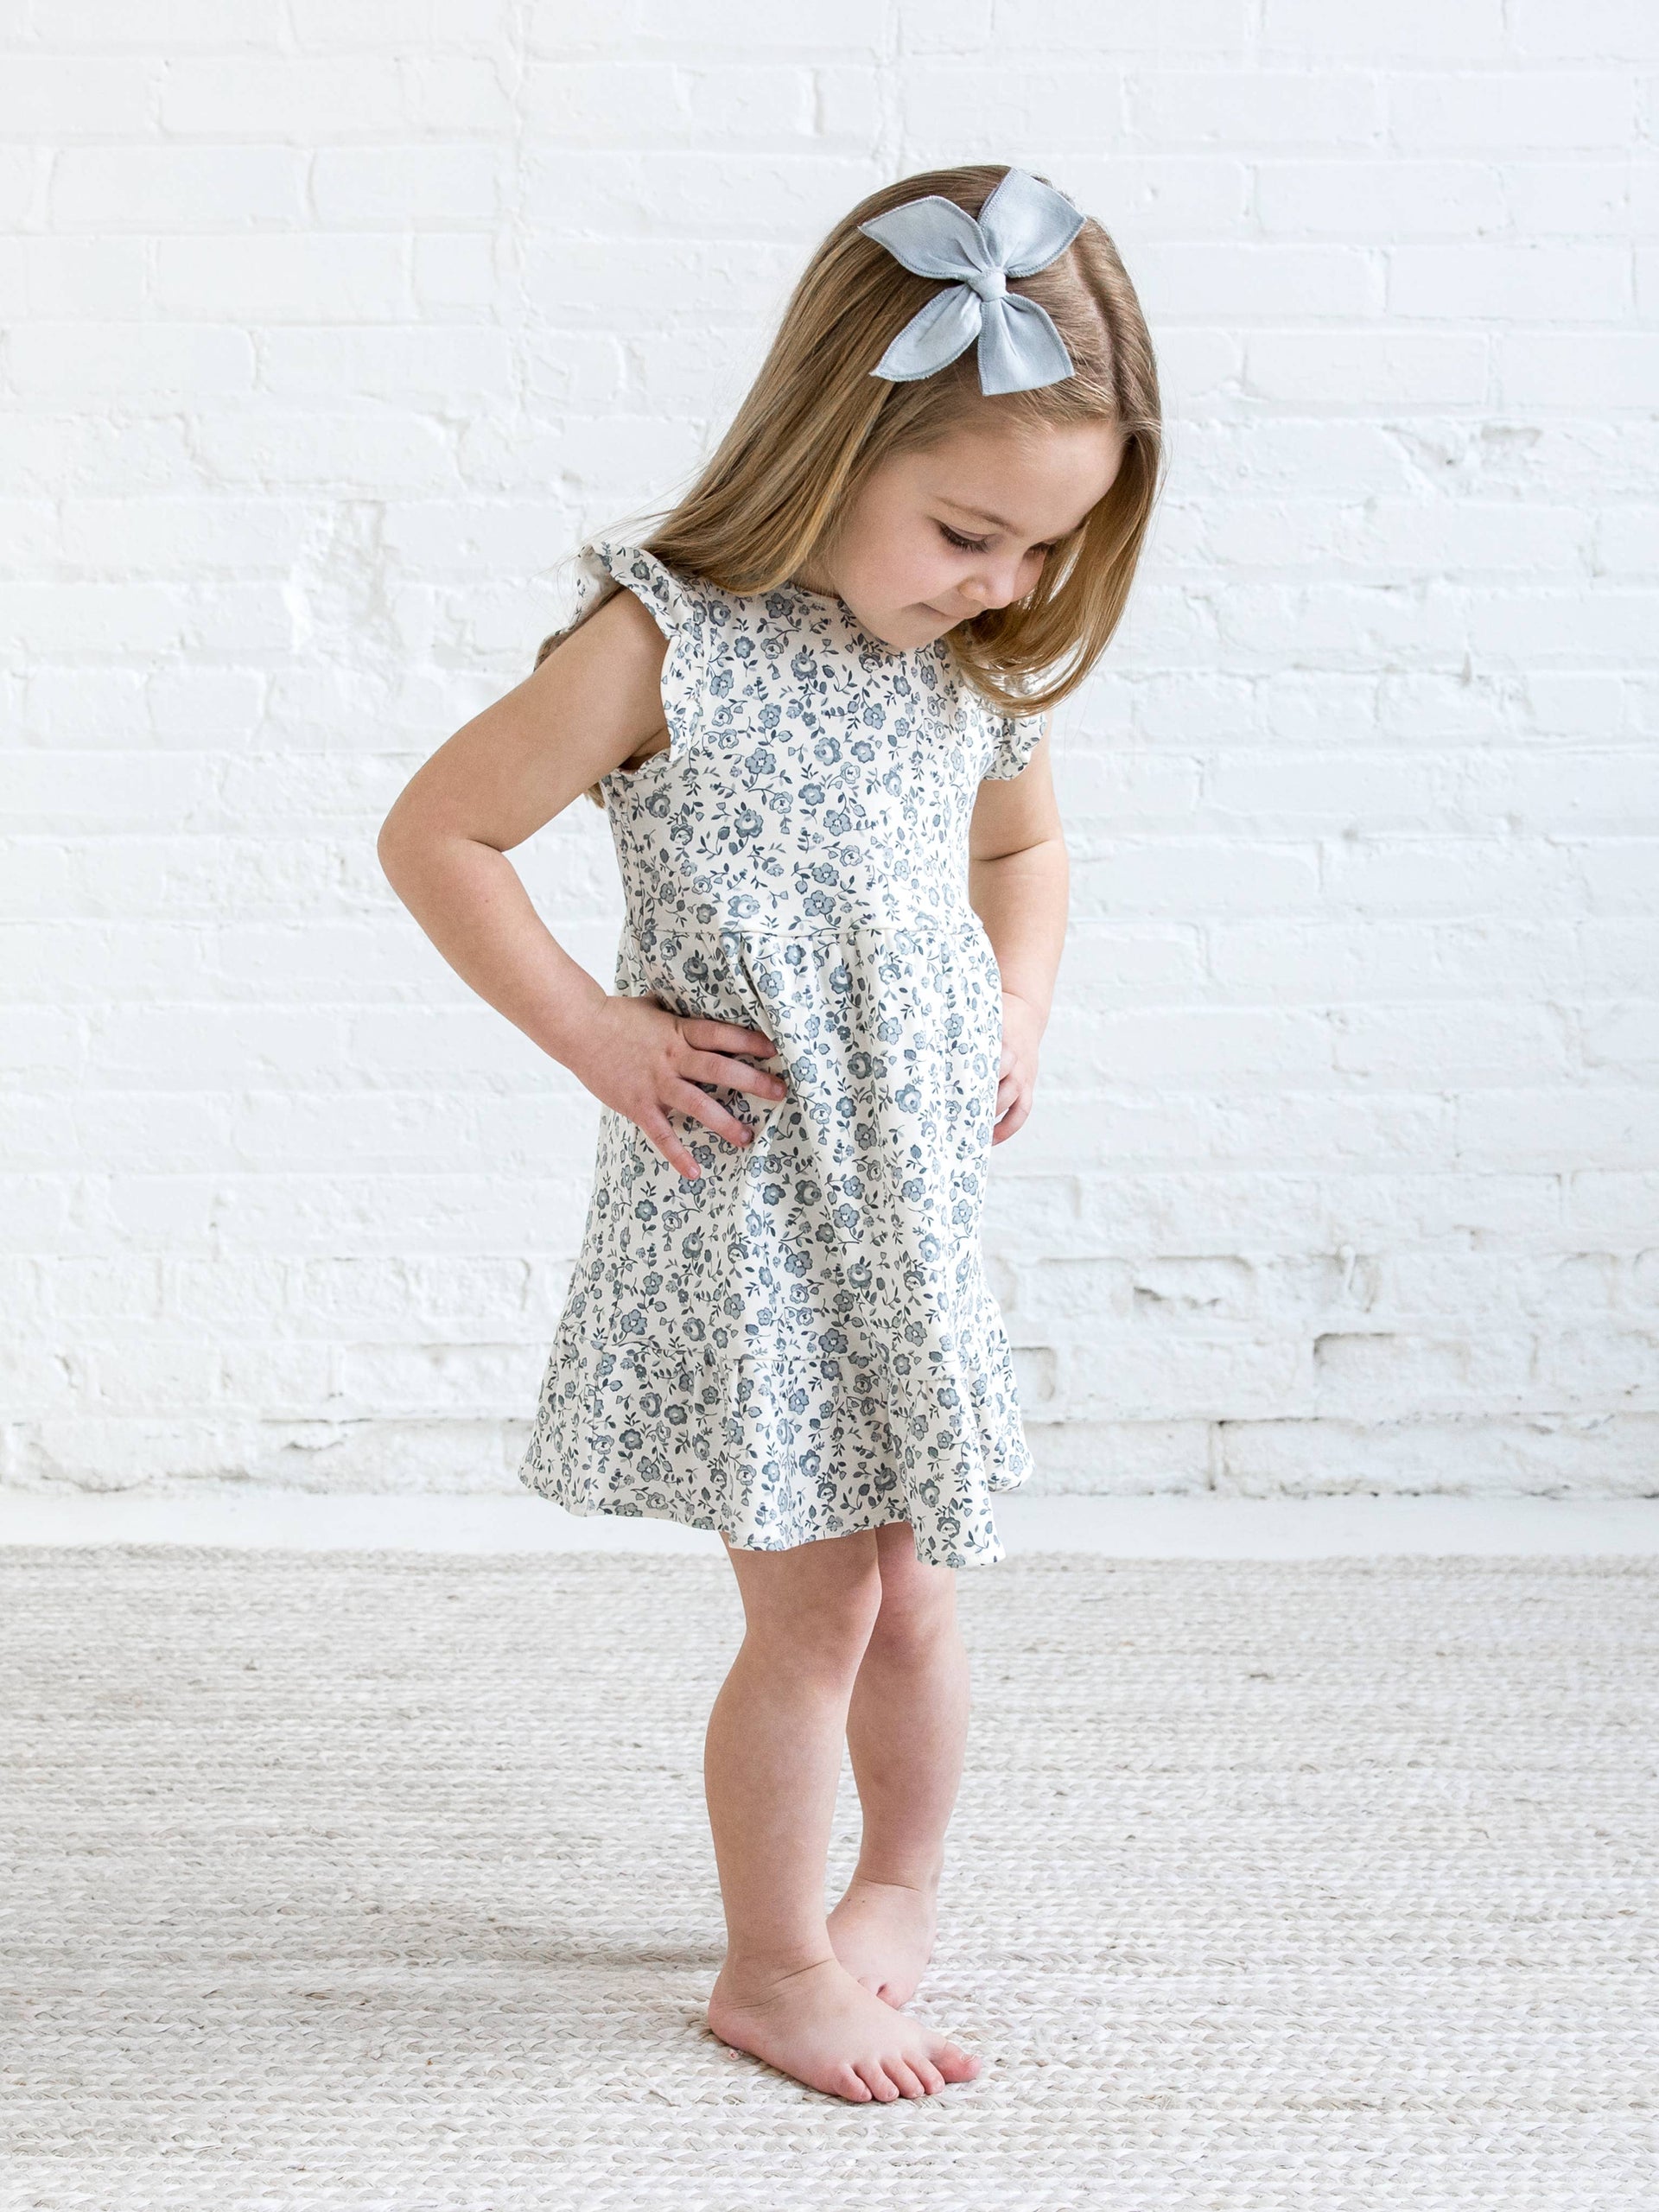 Colored Organics - Organic Baby & Kids Tilly Tiered Dress - Lena Floral: 18-24M